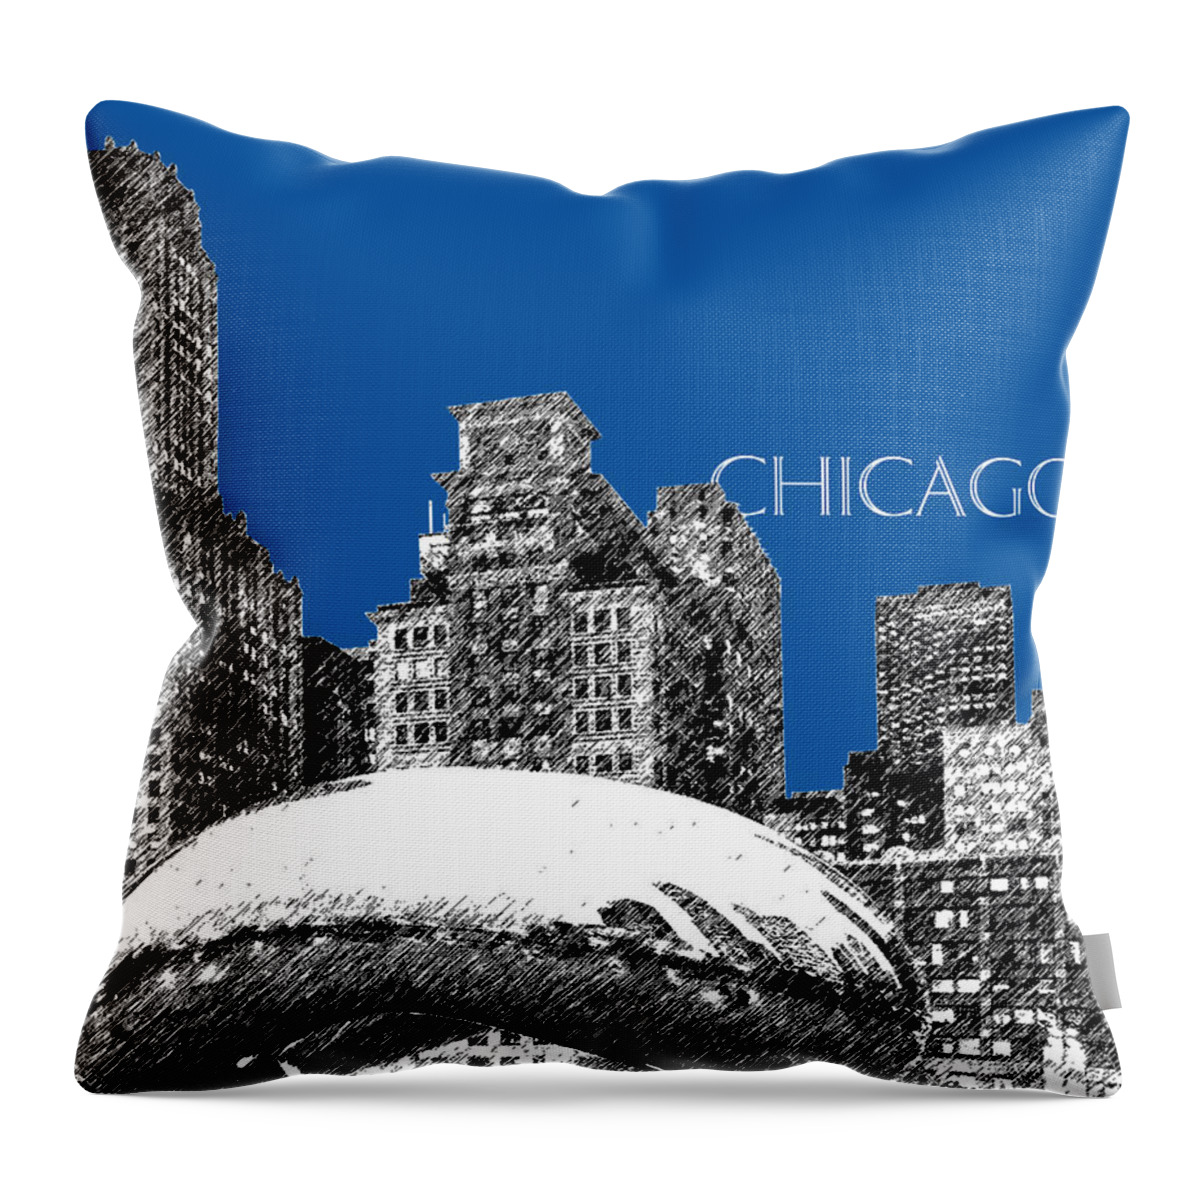 Architecture Throw Pillow featuring the digital art Chicago The Bean - Royal Blue by DB Artist